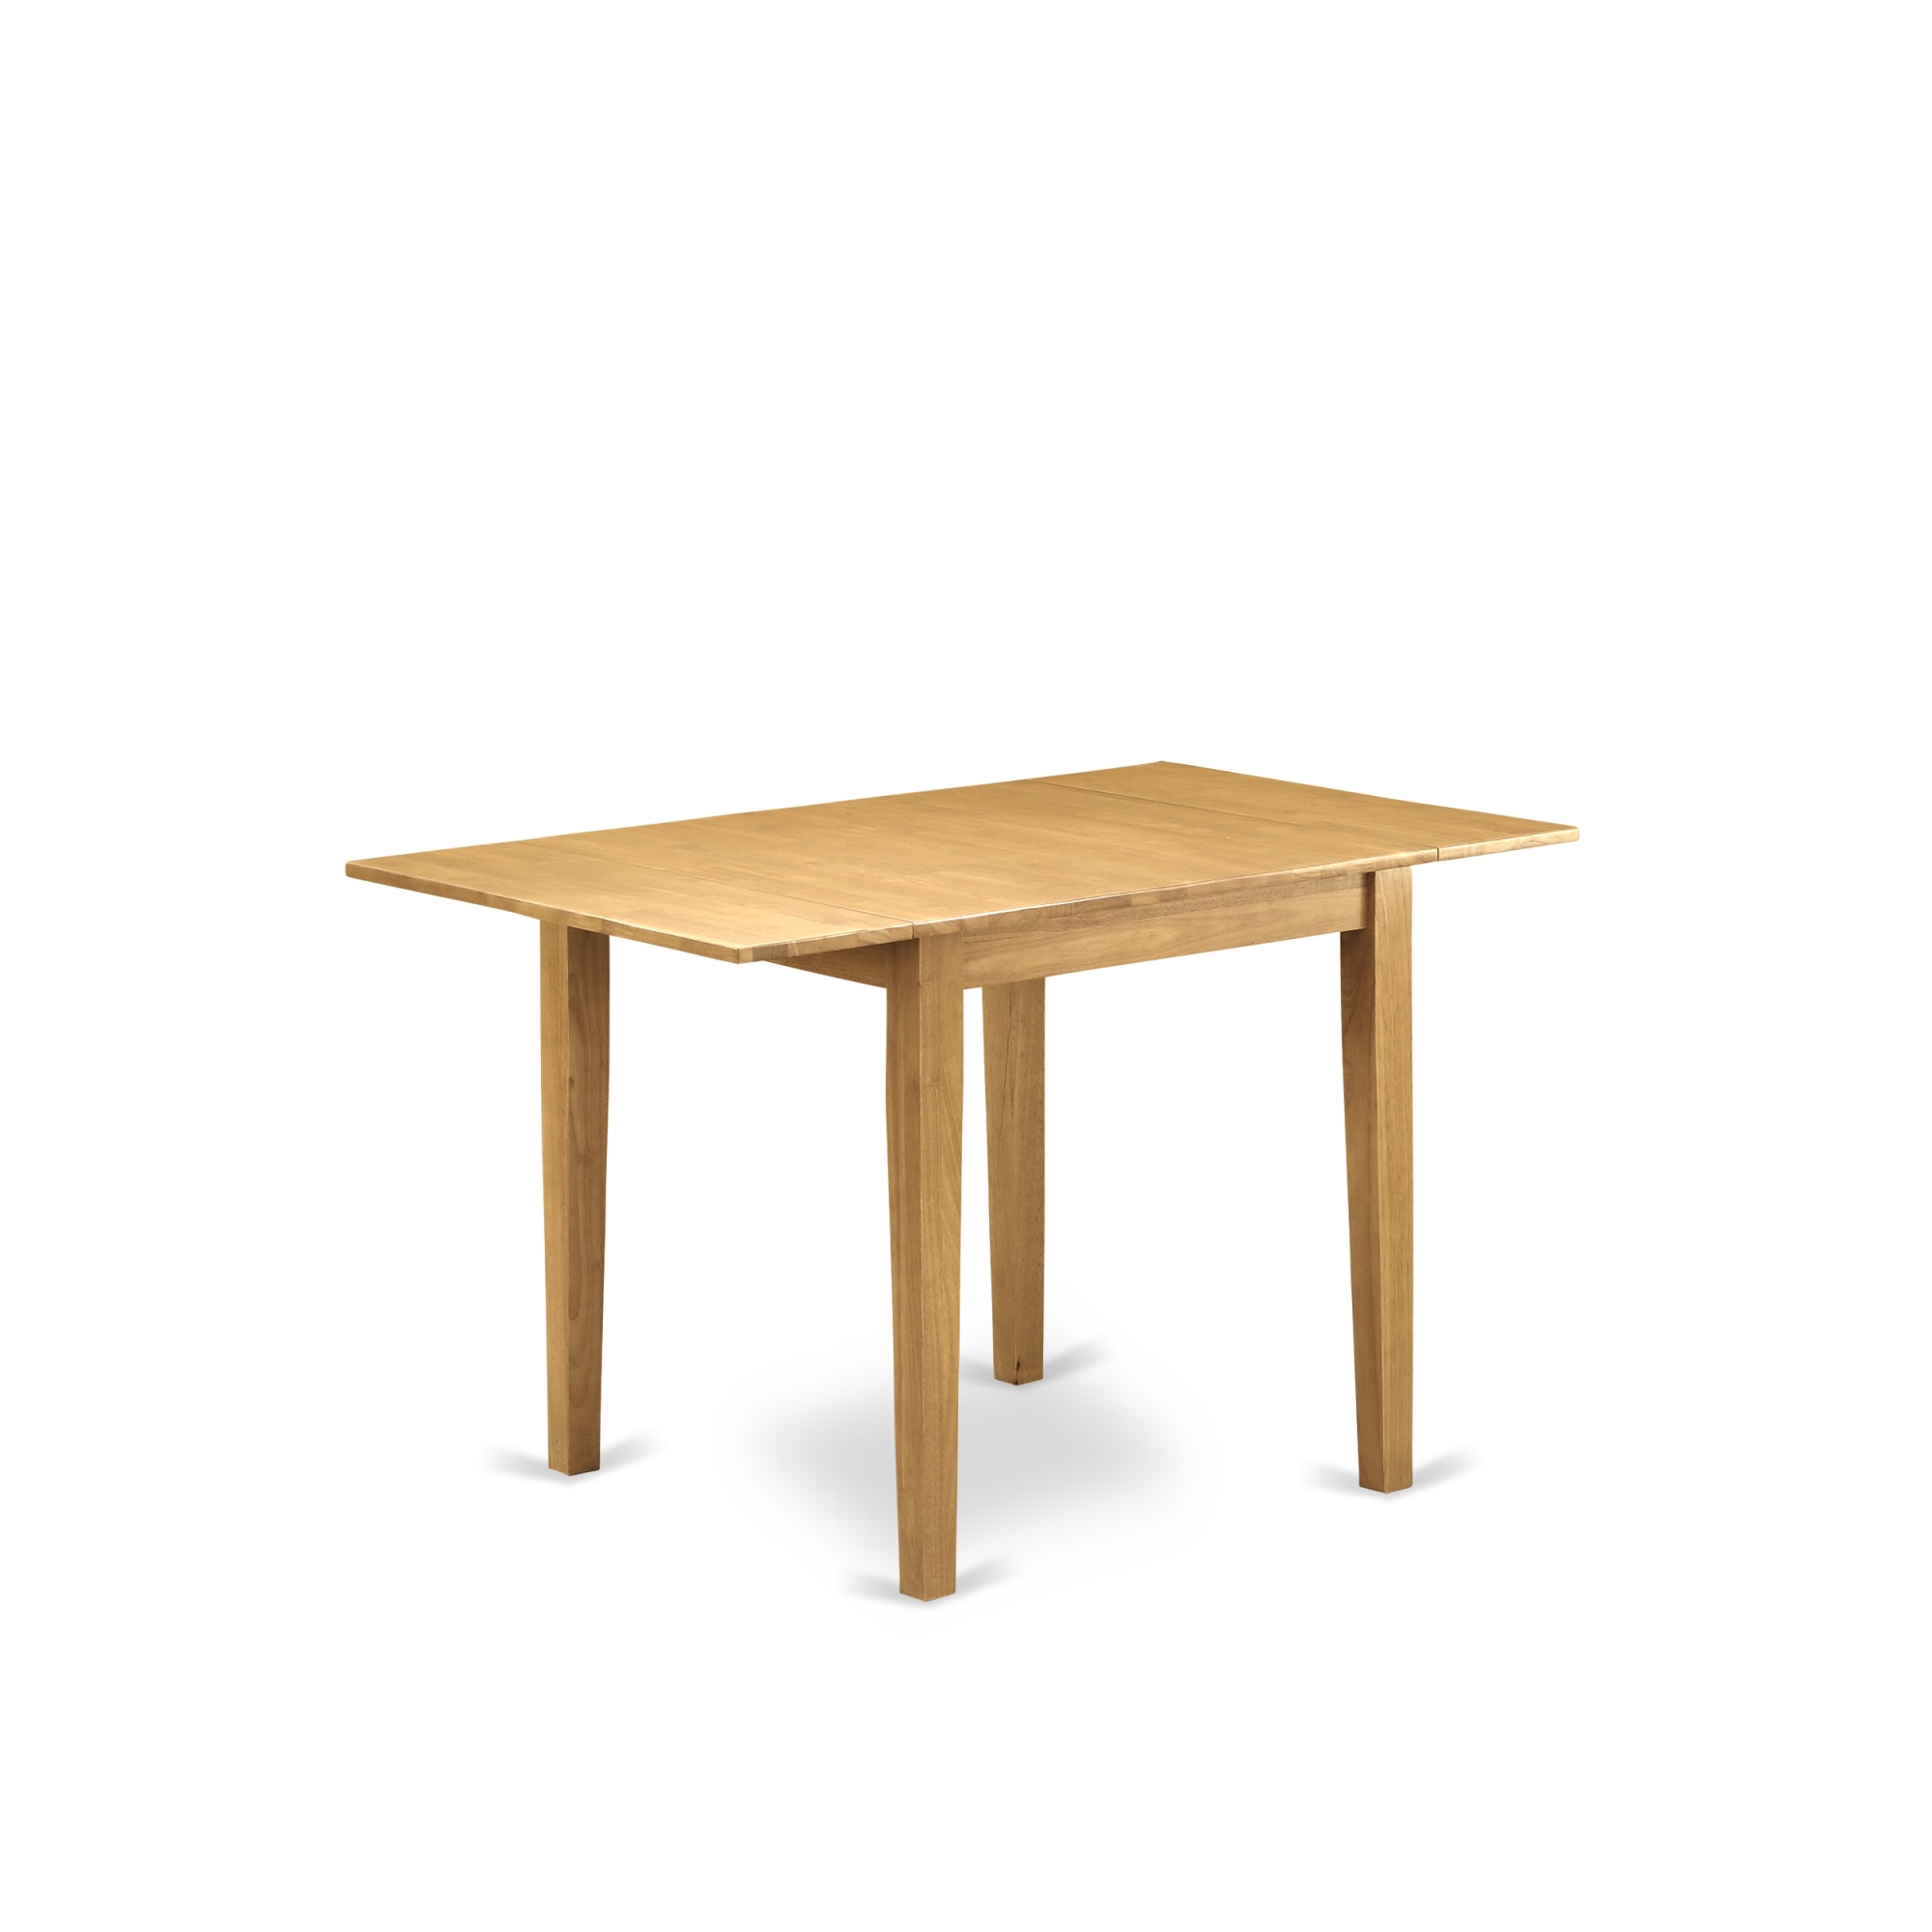 East West Furniture NDT-OAK-T Norden Rectangular Table 30"X48" With 2 Drop Leaves In Oak Finish